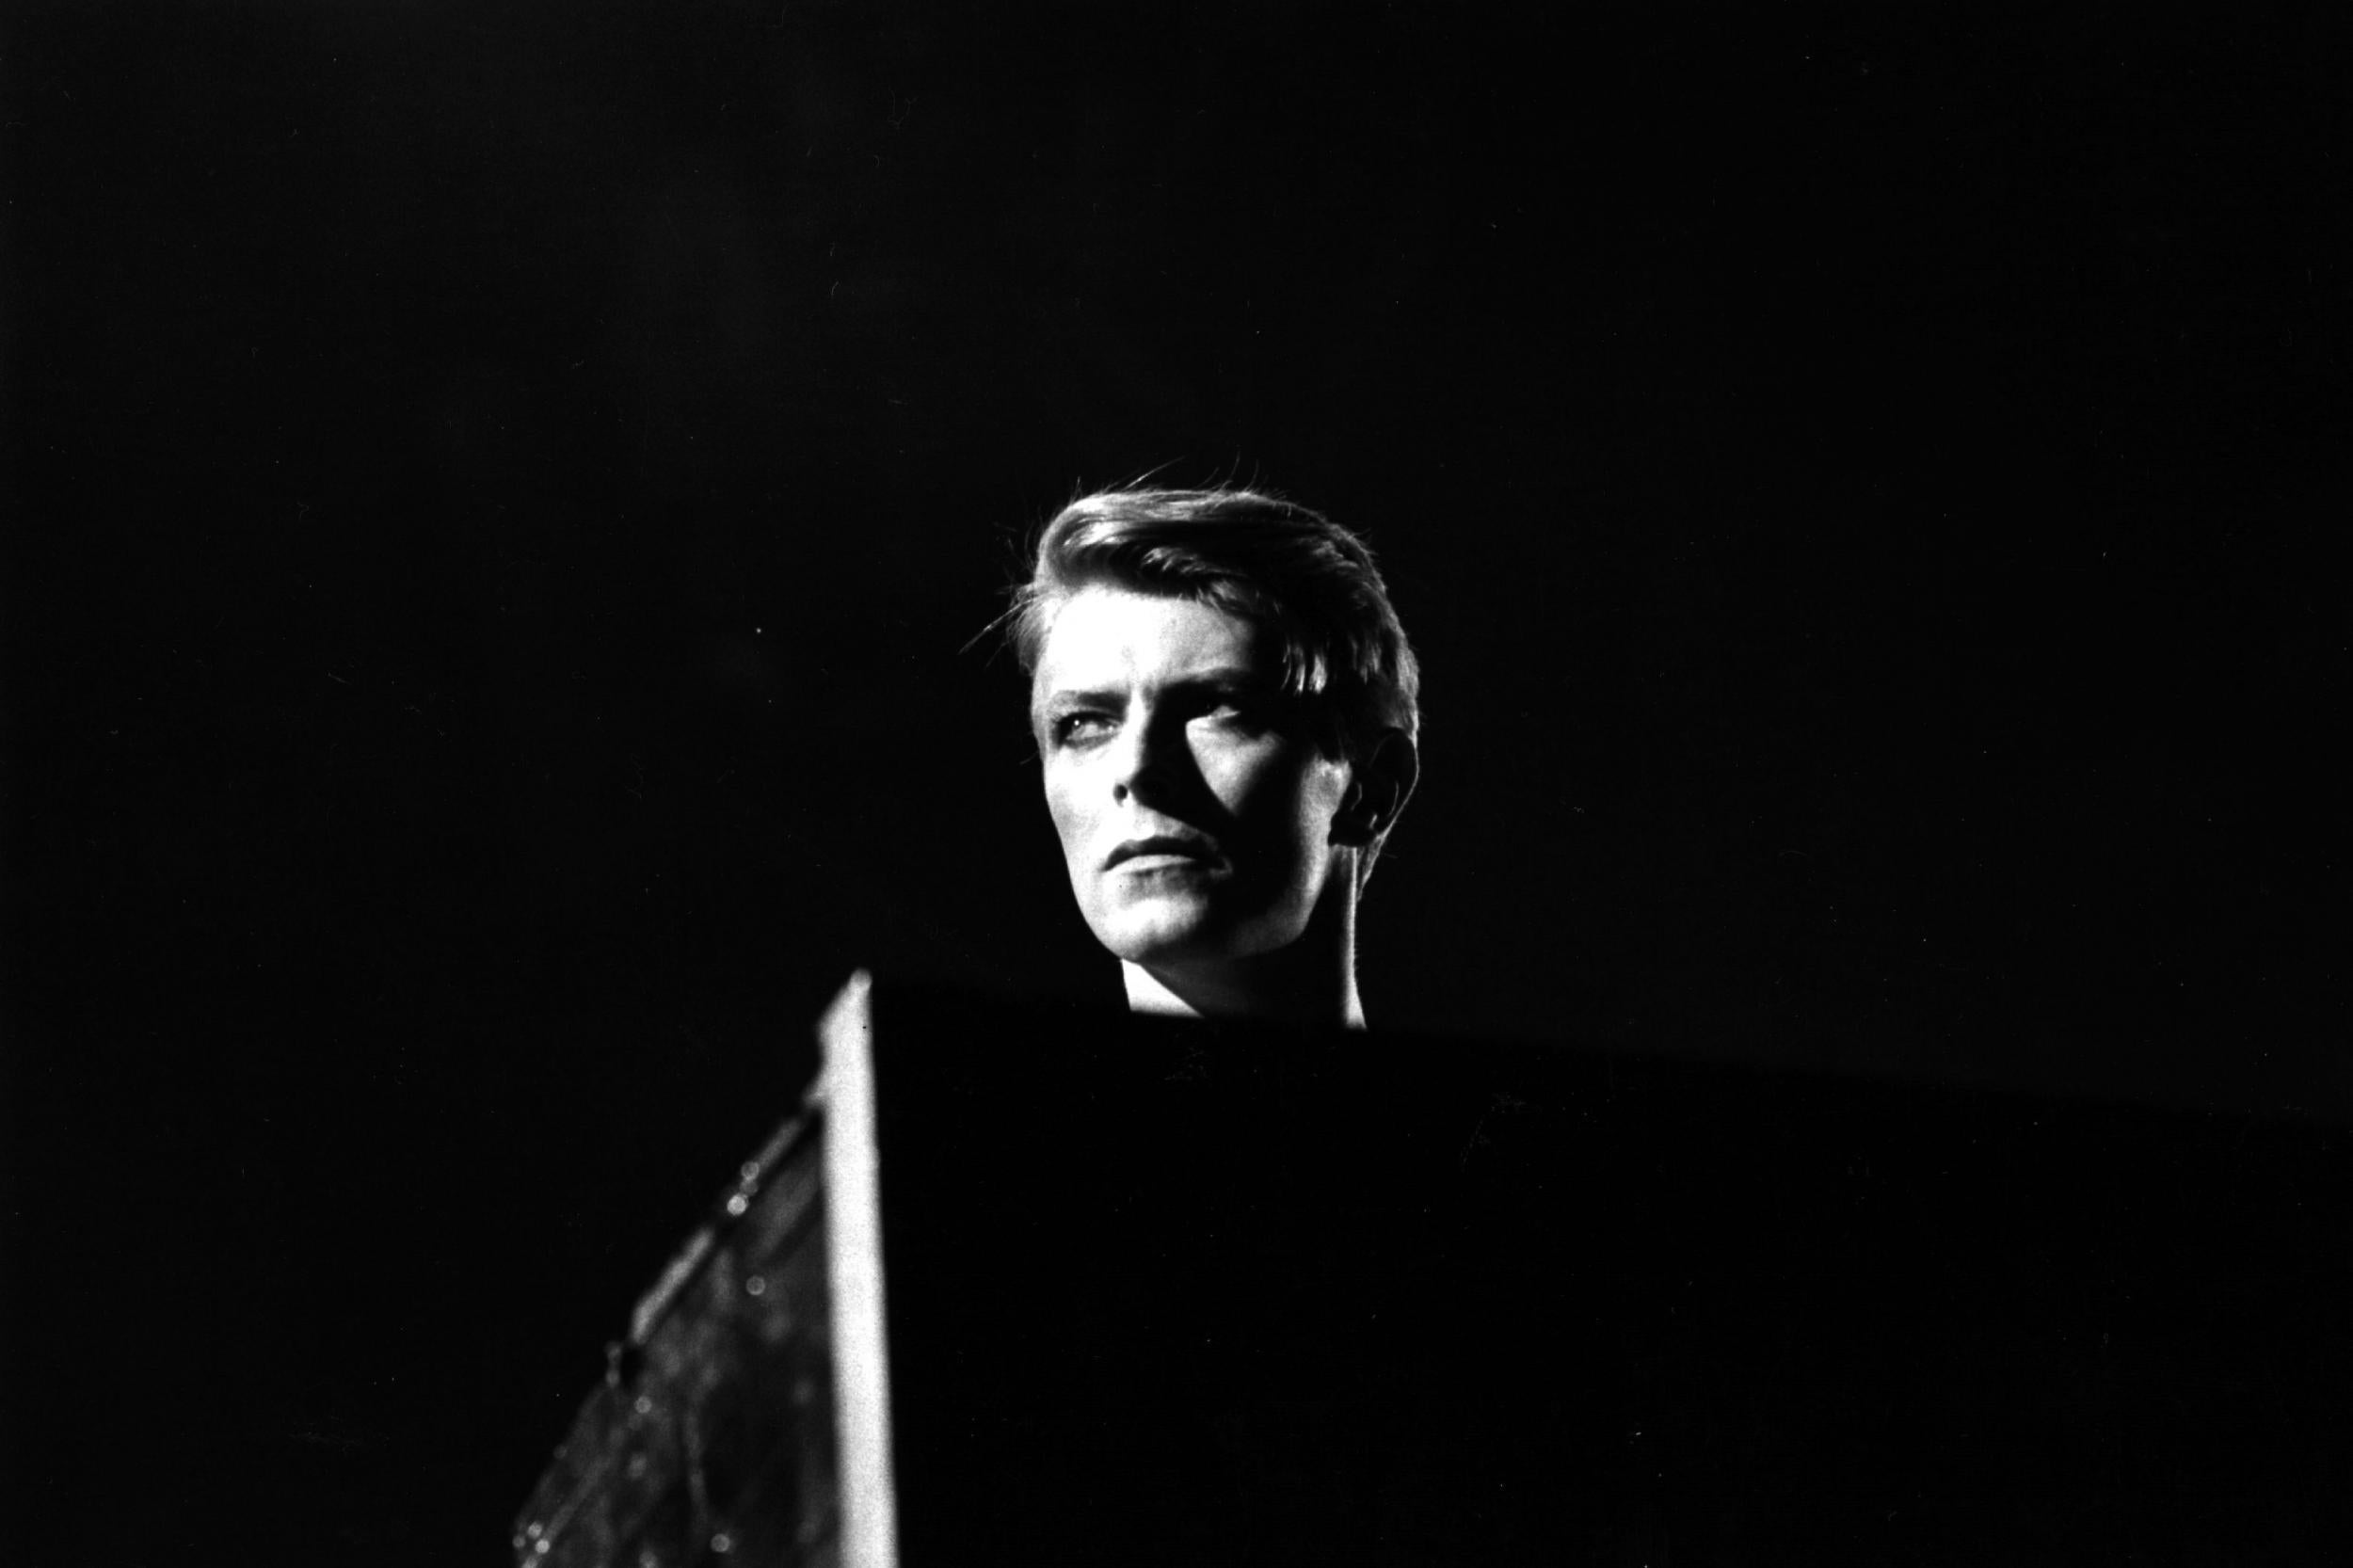 British pop singer David Bowie in concert at Earl's Court, London during his 1978 world tour